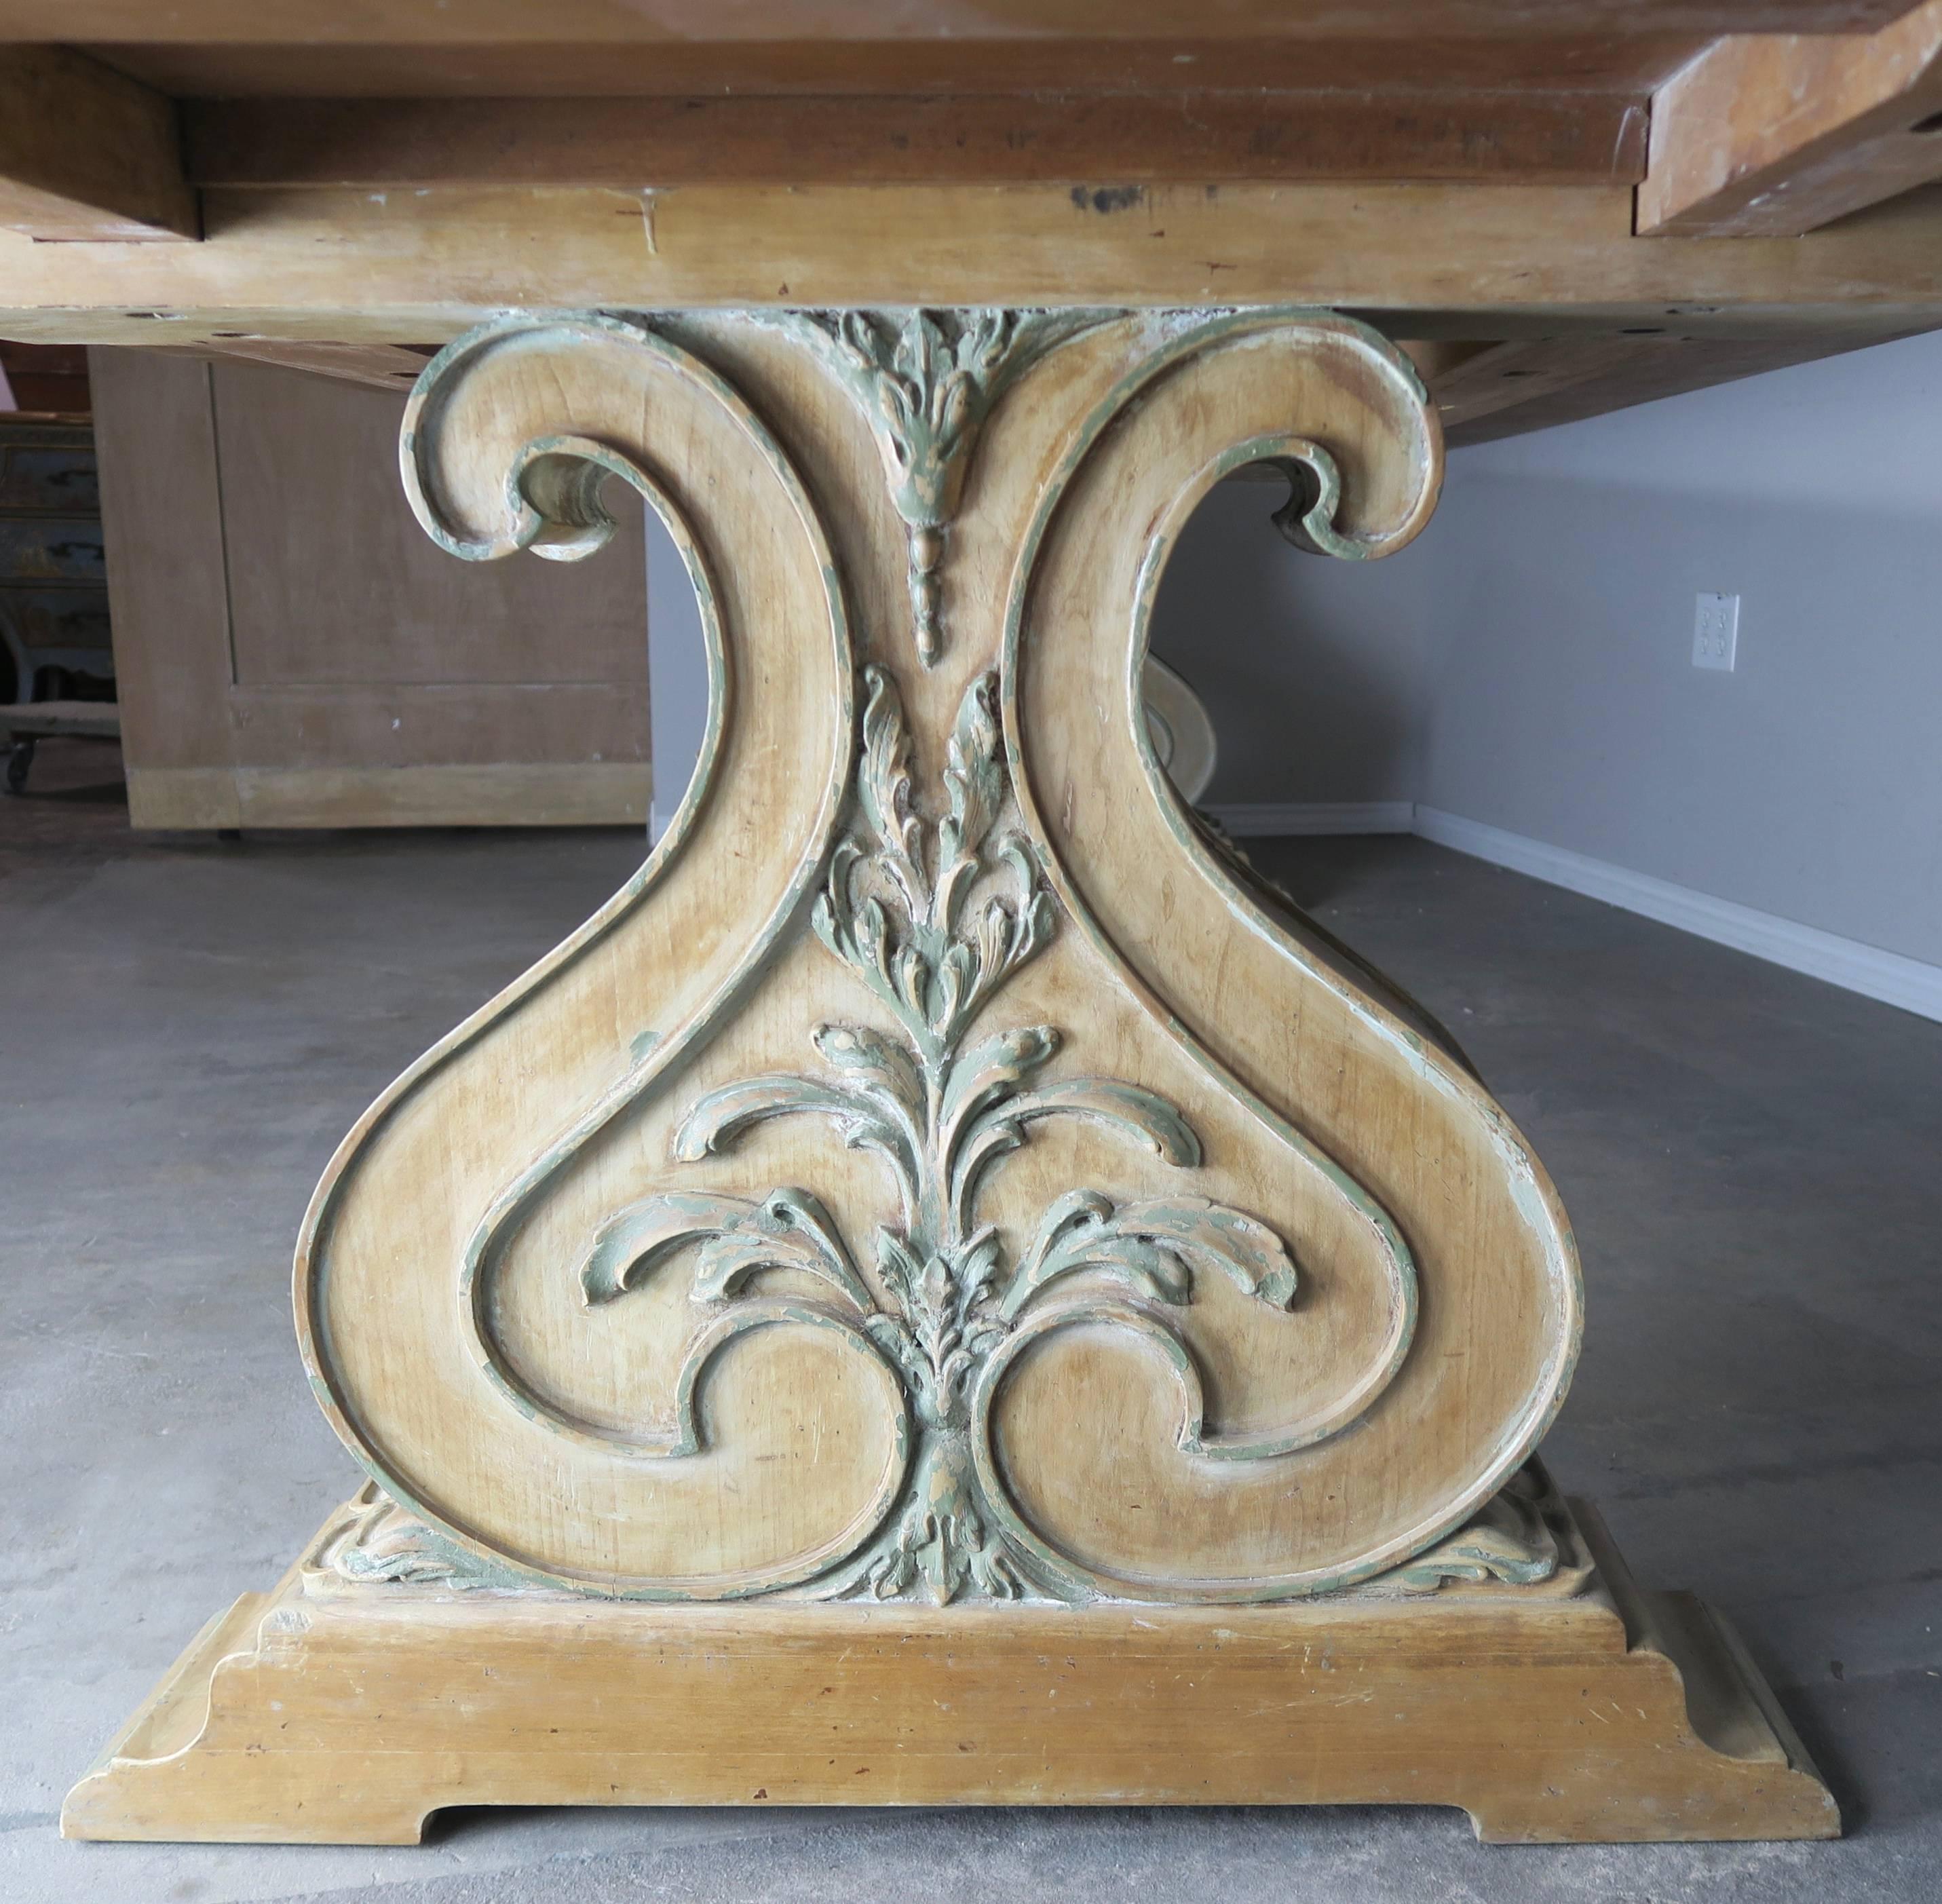 20th Century Italian Carved and Painted Dining Room Table, circa 1930s